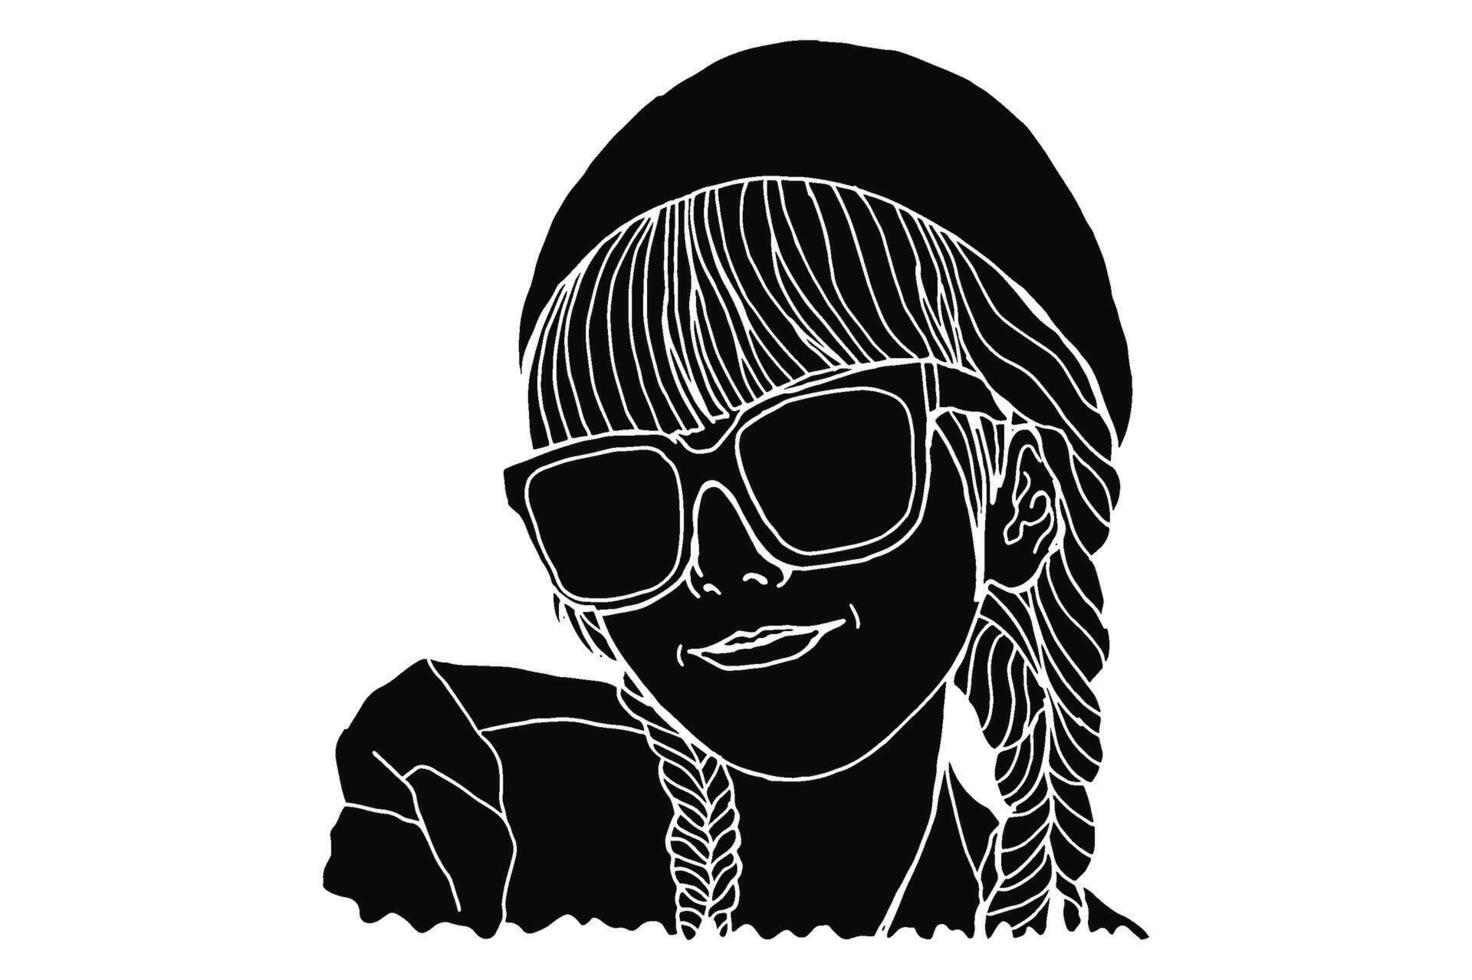 Summer Theme Woman Wearing Sunglasses Silhouette Vector